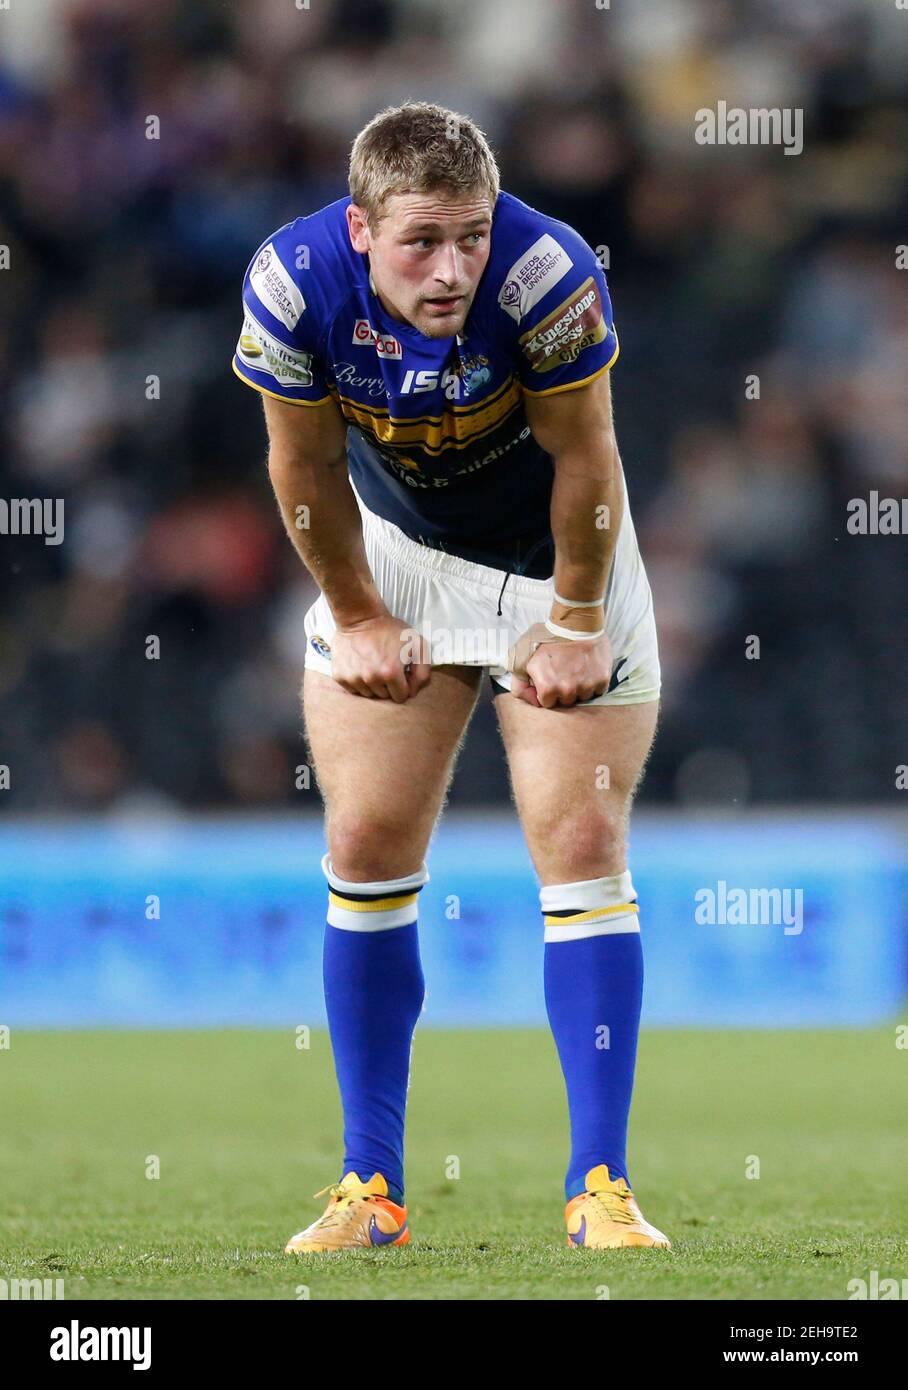 Rugby League - Hull FC v Leeds Rhinos - First Utility Super League Super 8s - The Kingston Communications Stadium - 21/8/15 Jimmy Keinhorst of Leeds Rhinos Mandatory Credit: Action Images / Ed Sykes  EDITORIAL USE ONLY. Stock Photo